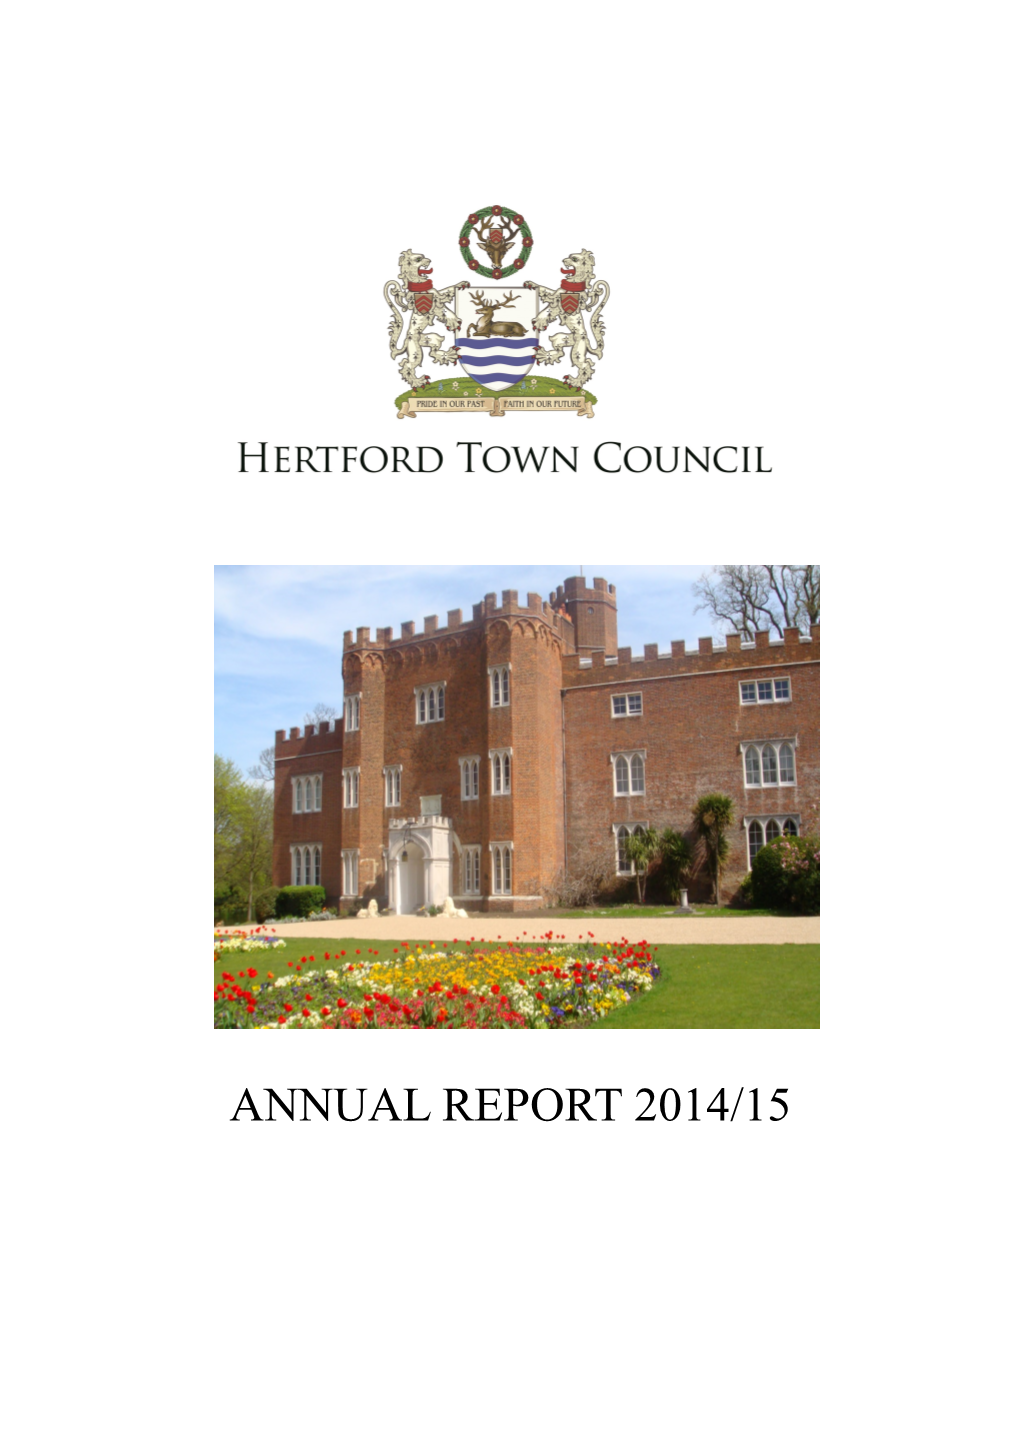 Hertford Town Council Annual Report 2014/15